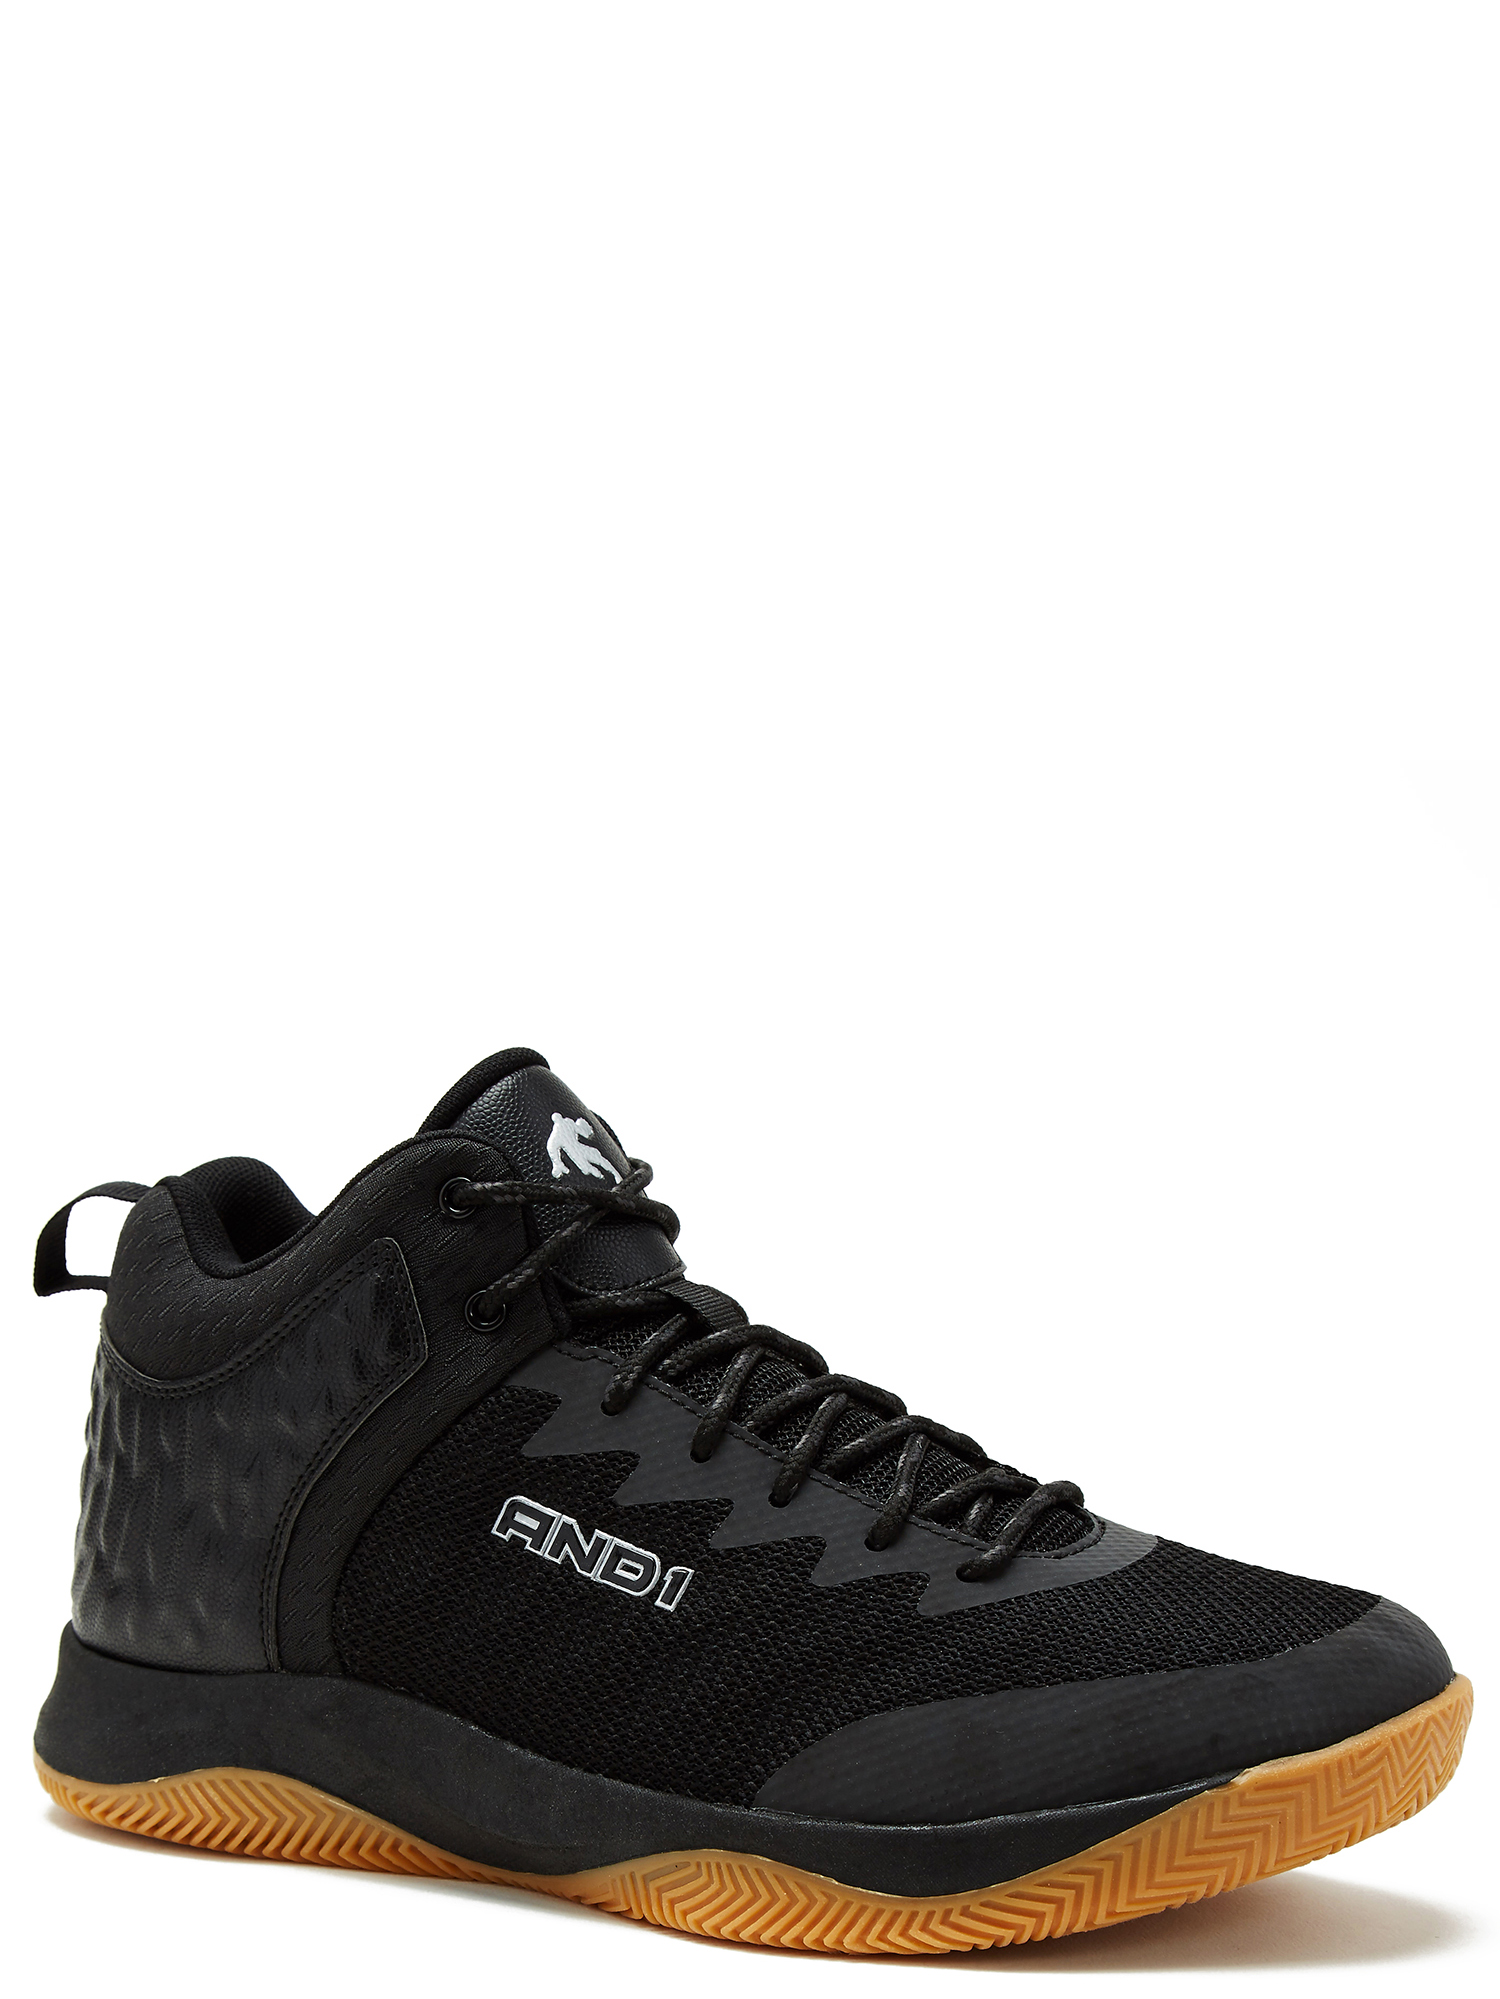 AND 1 Men's Court Shoe - image 1 of 3